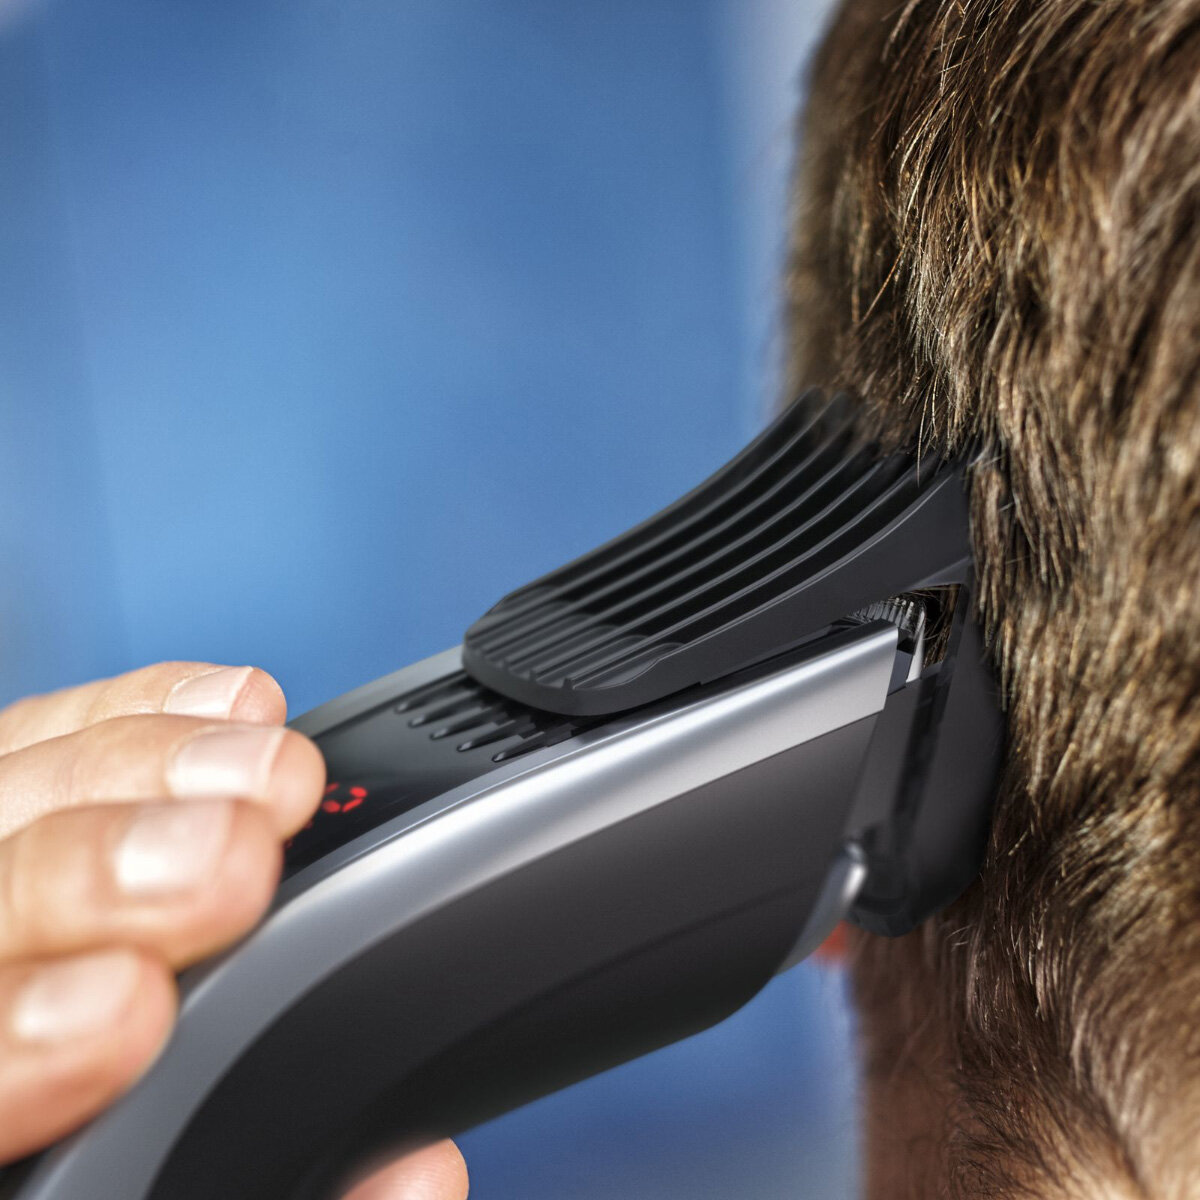 philips series 9000 hair clipper review